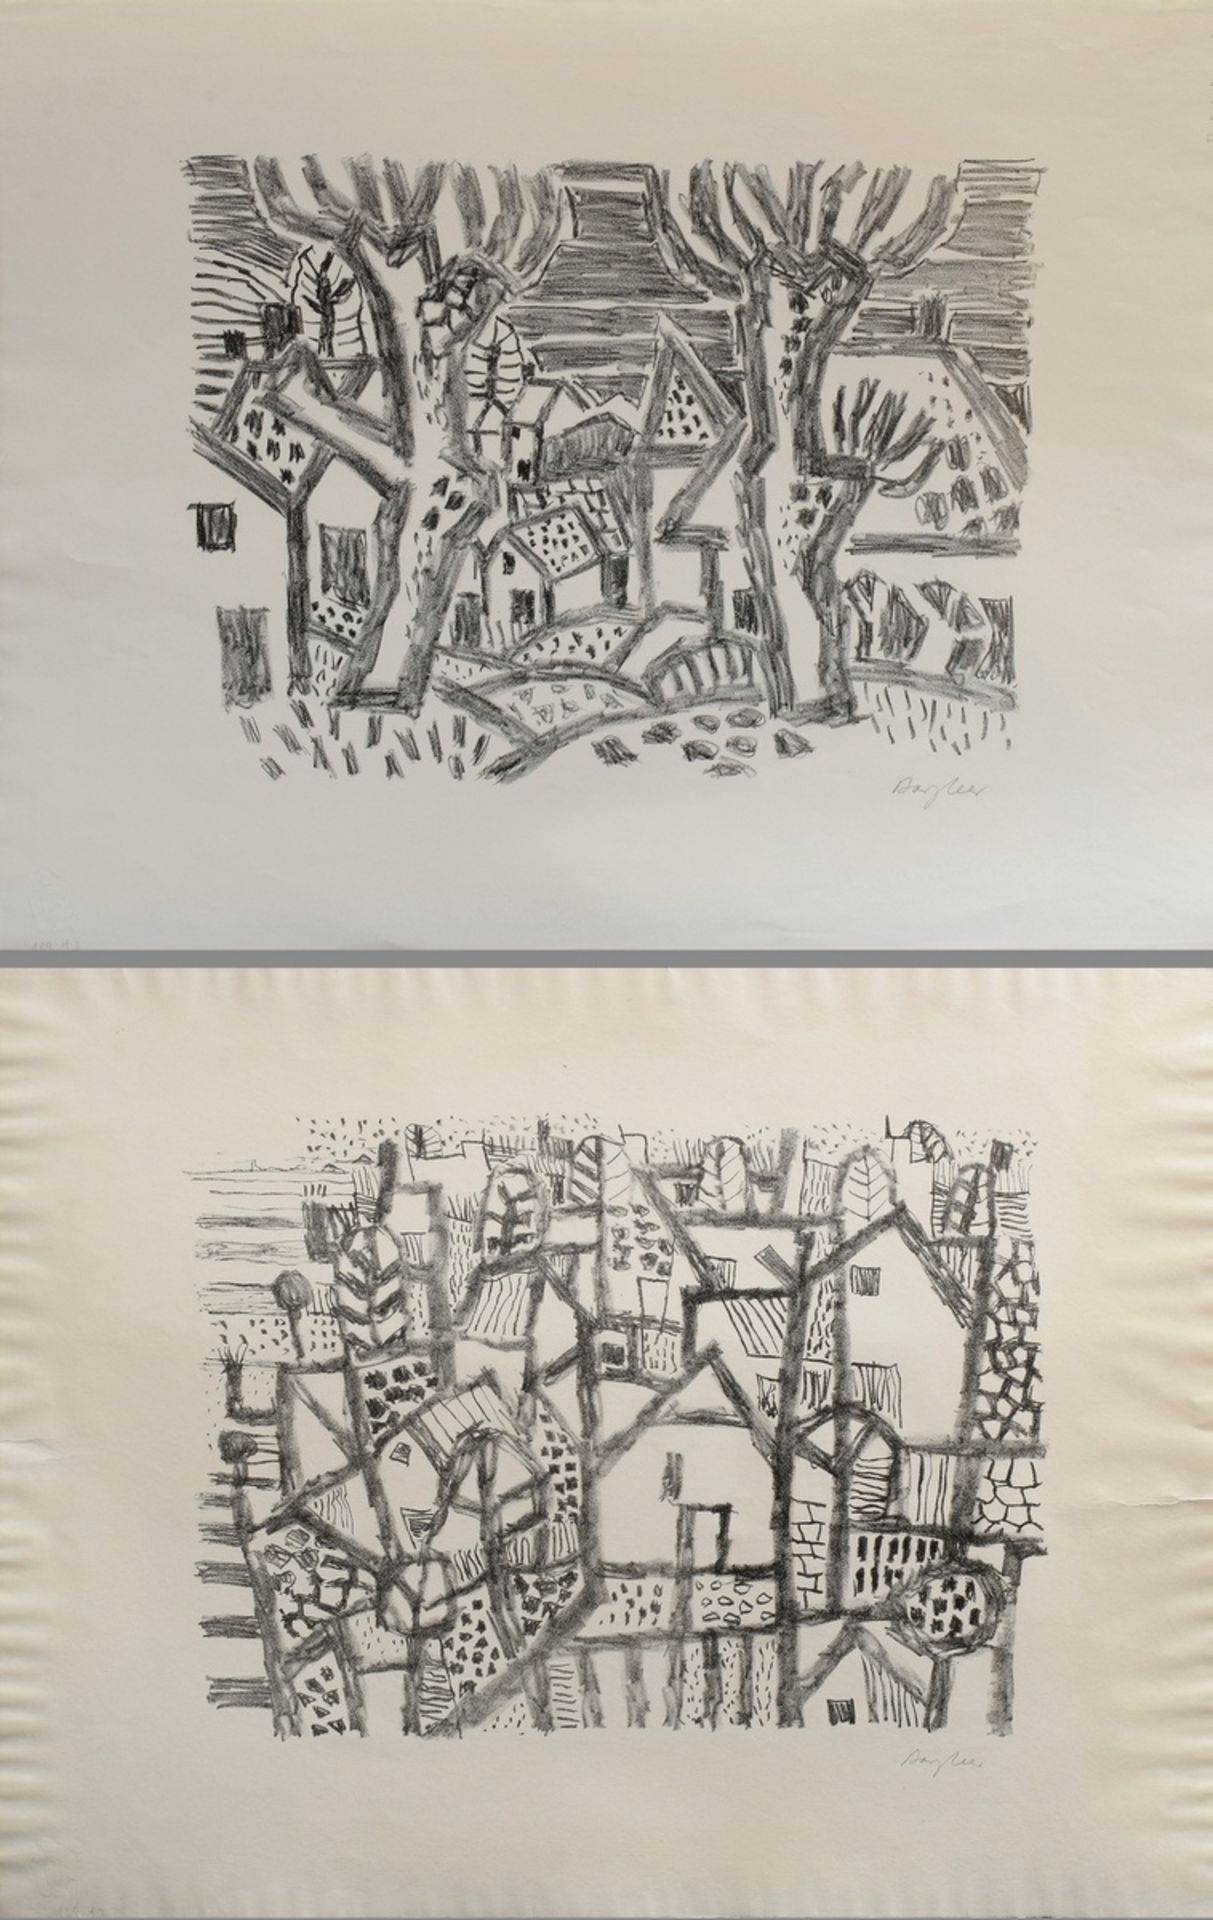 2 Bargheer, Eduard (1901-1979) "Winter at the river" 1966 and "Houses in Blankenese" 1960, lithogra